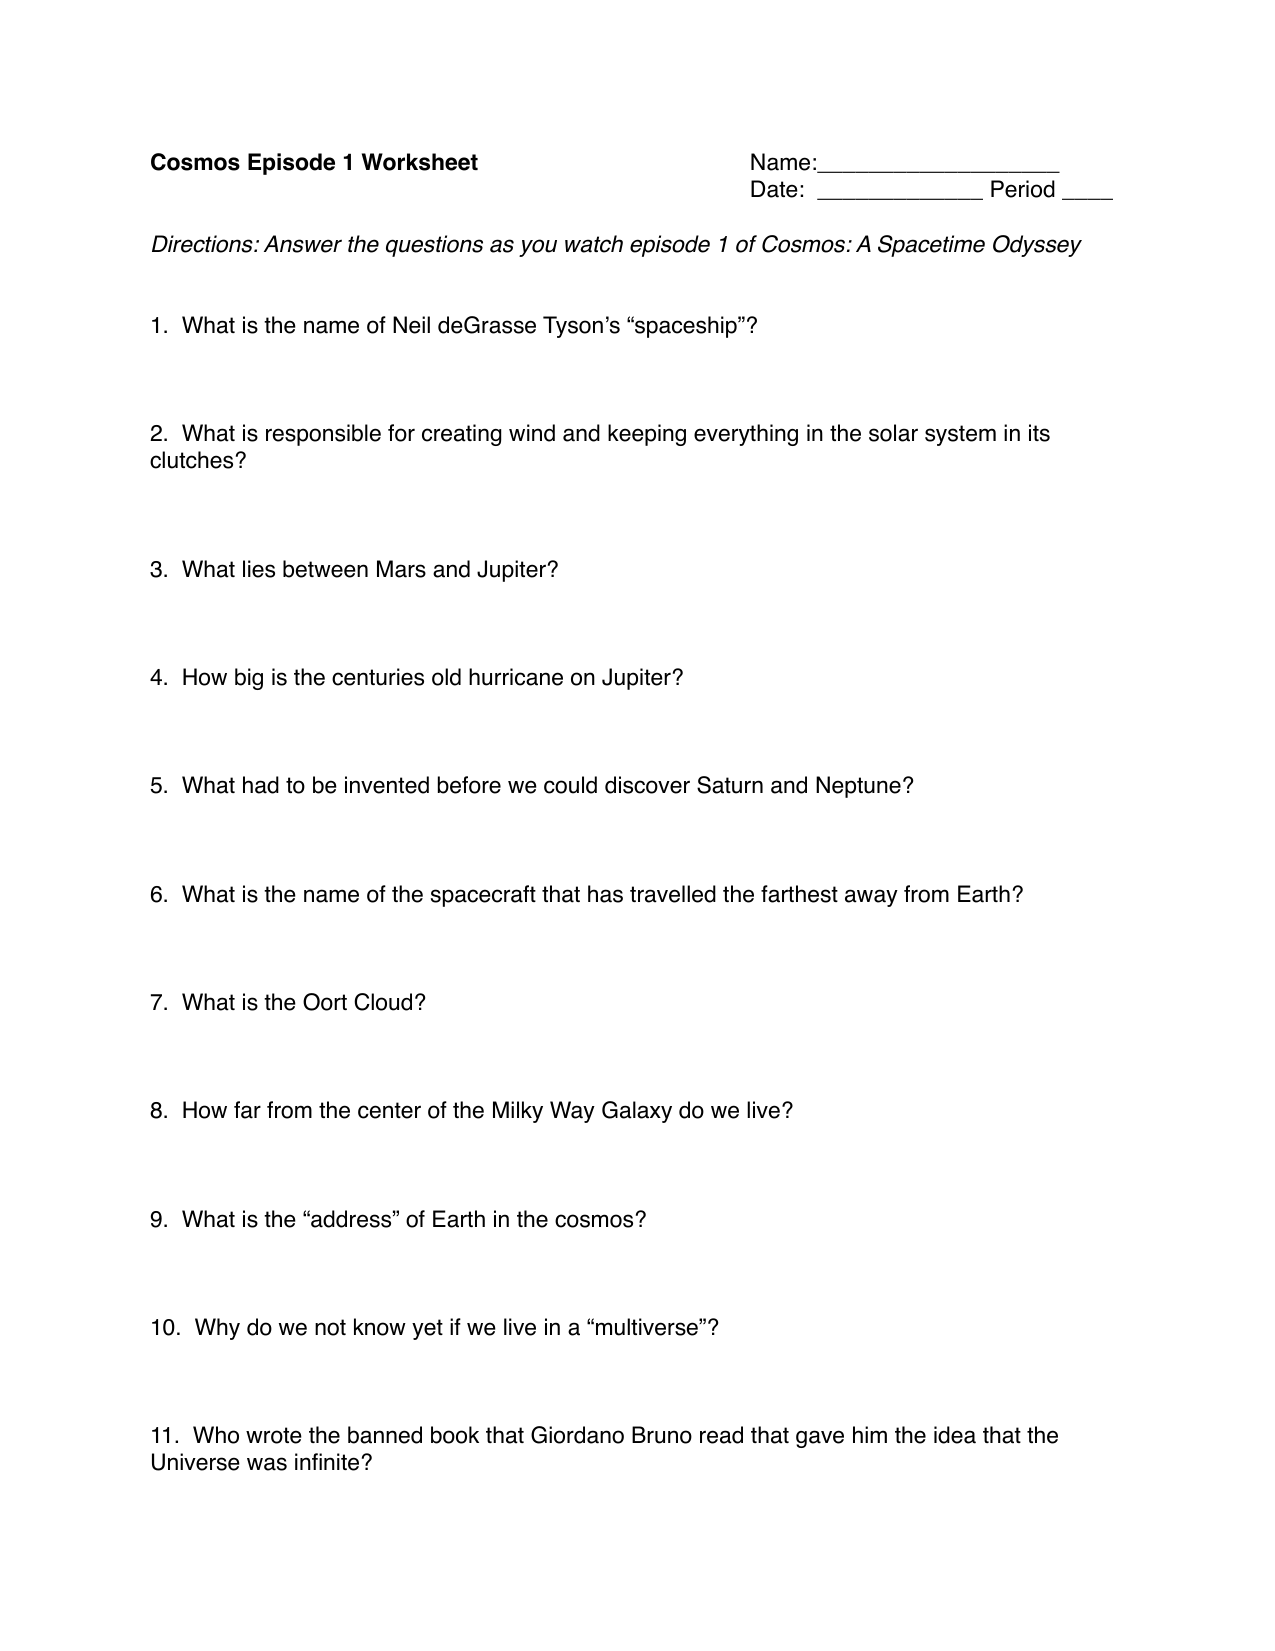 Cosmos Episode 22 Worksheet Answers